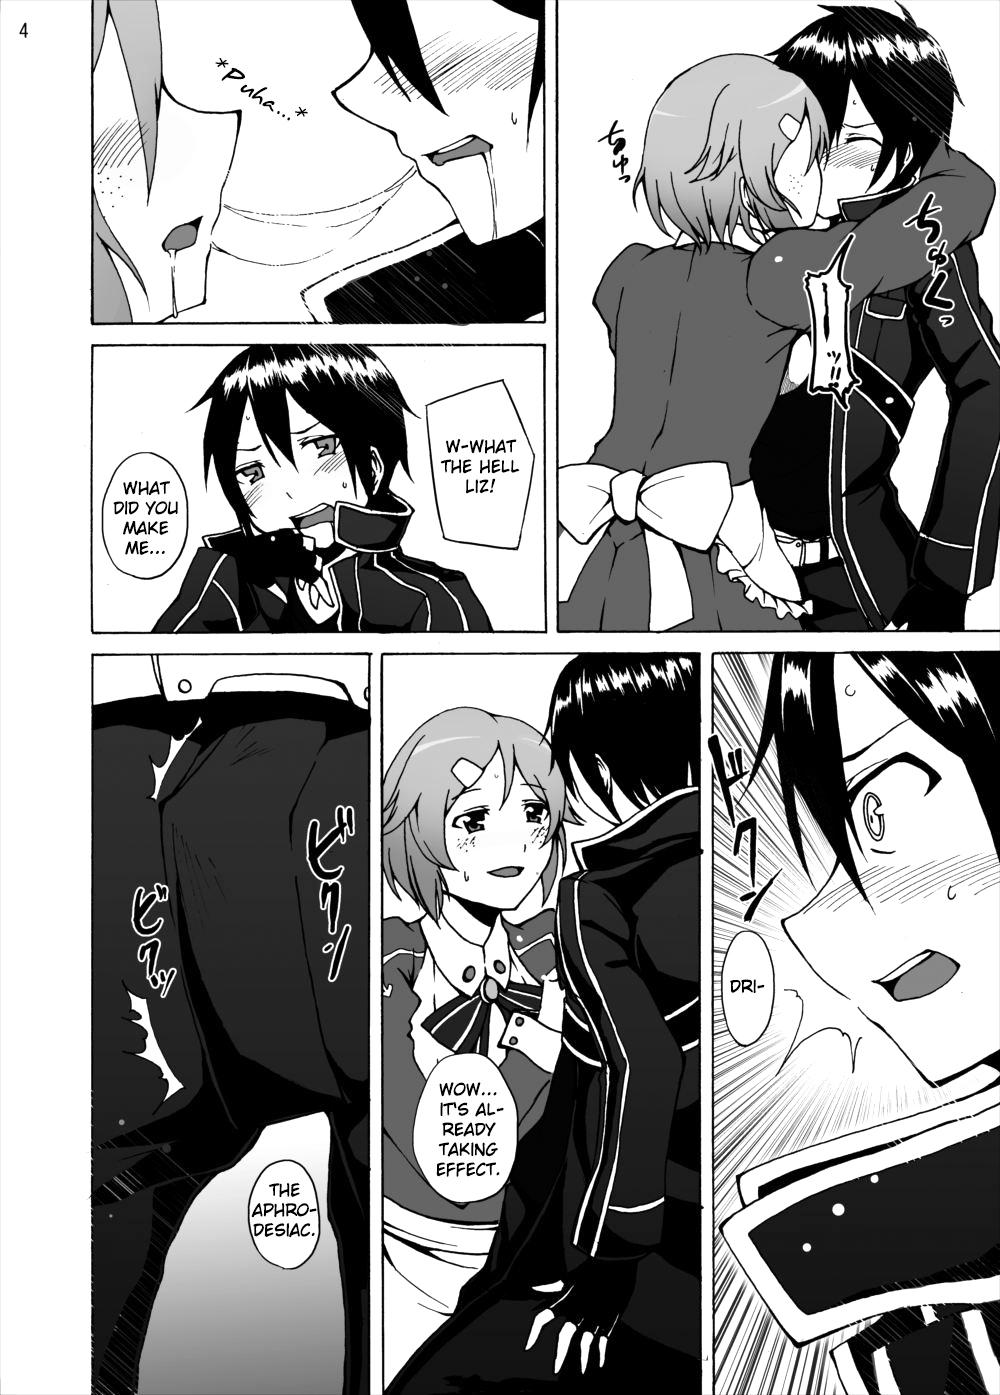 Husband Lisbeth's Decision...To Steal Kirito From Asuna Even if She Has to Use a Dangerous Drug - Sword art online Handjob - Page 4